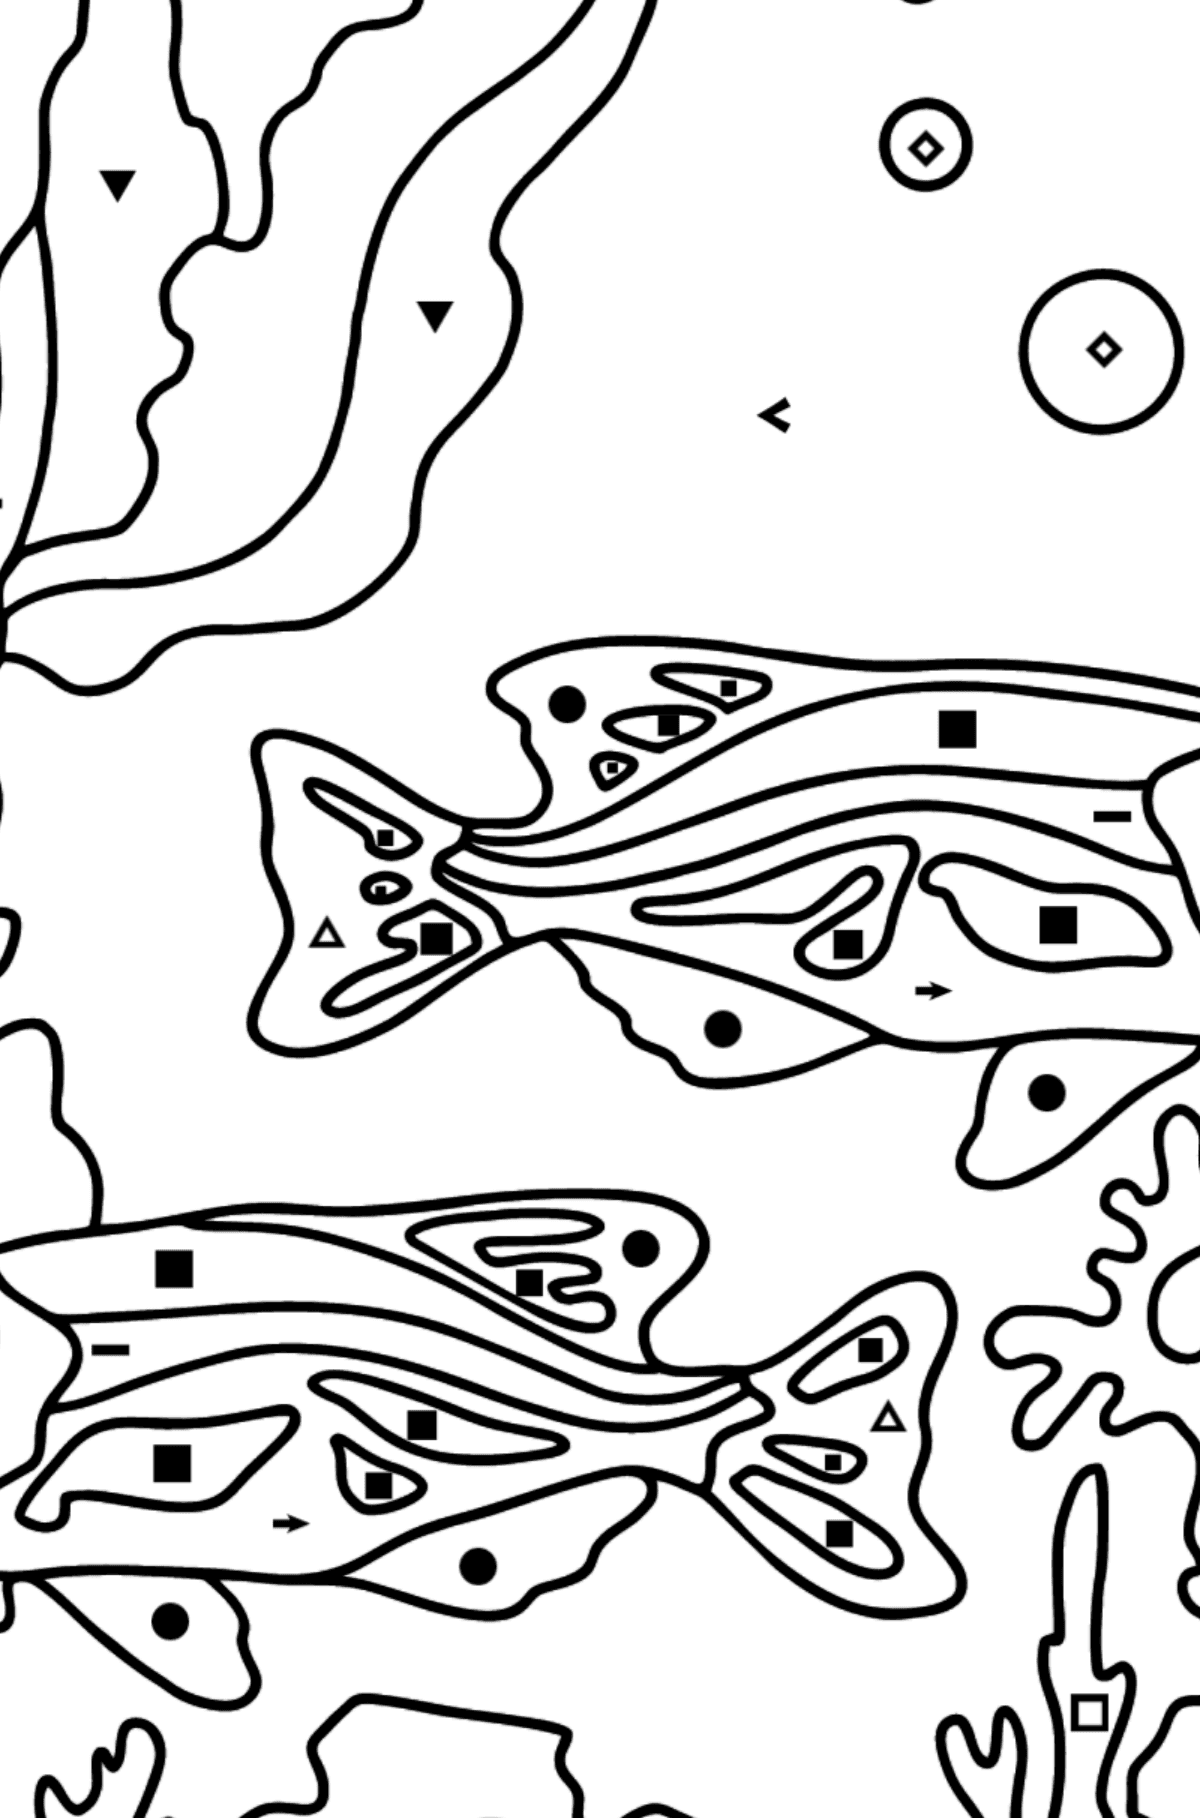 Two Fish Coloring Page - Fish are Swimming Beautifully - Coloring by Symbols for Kids